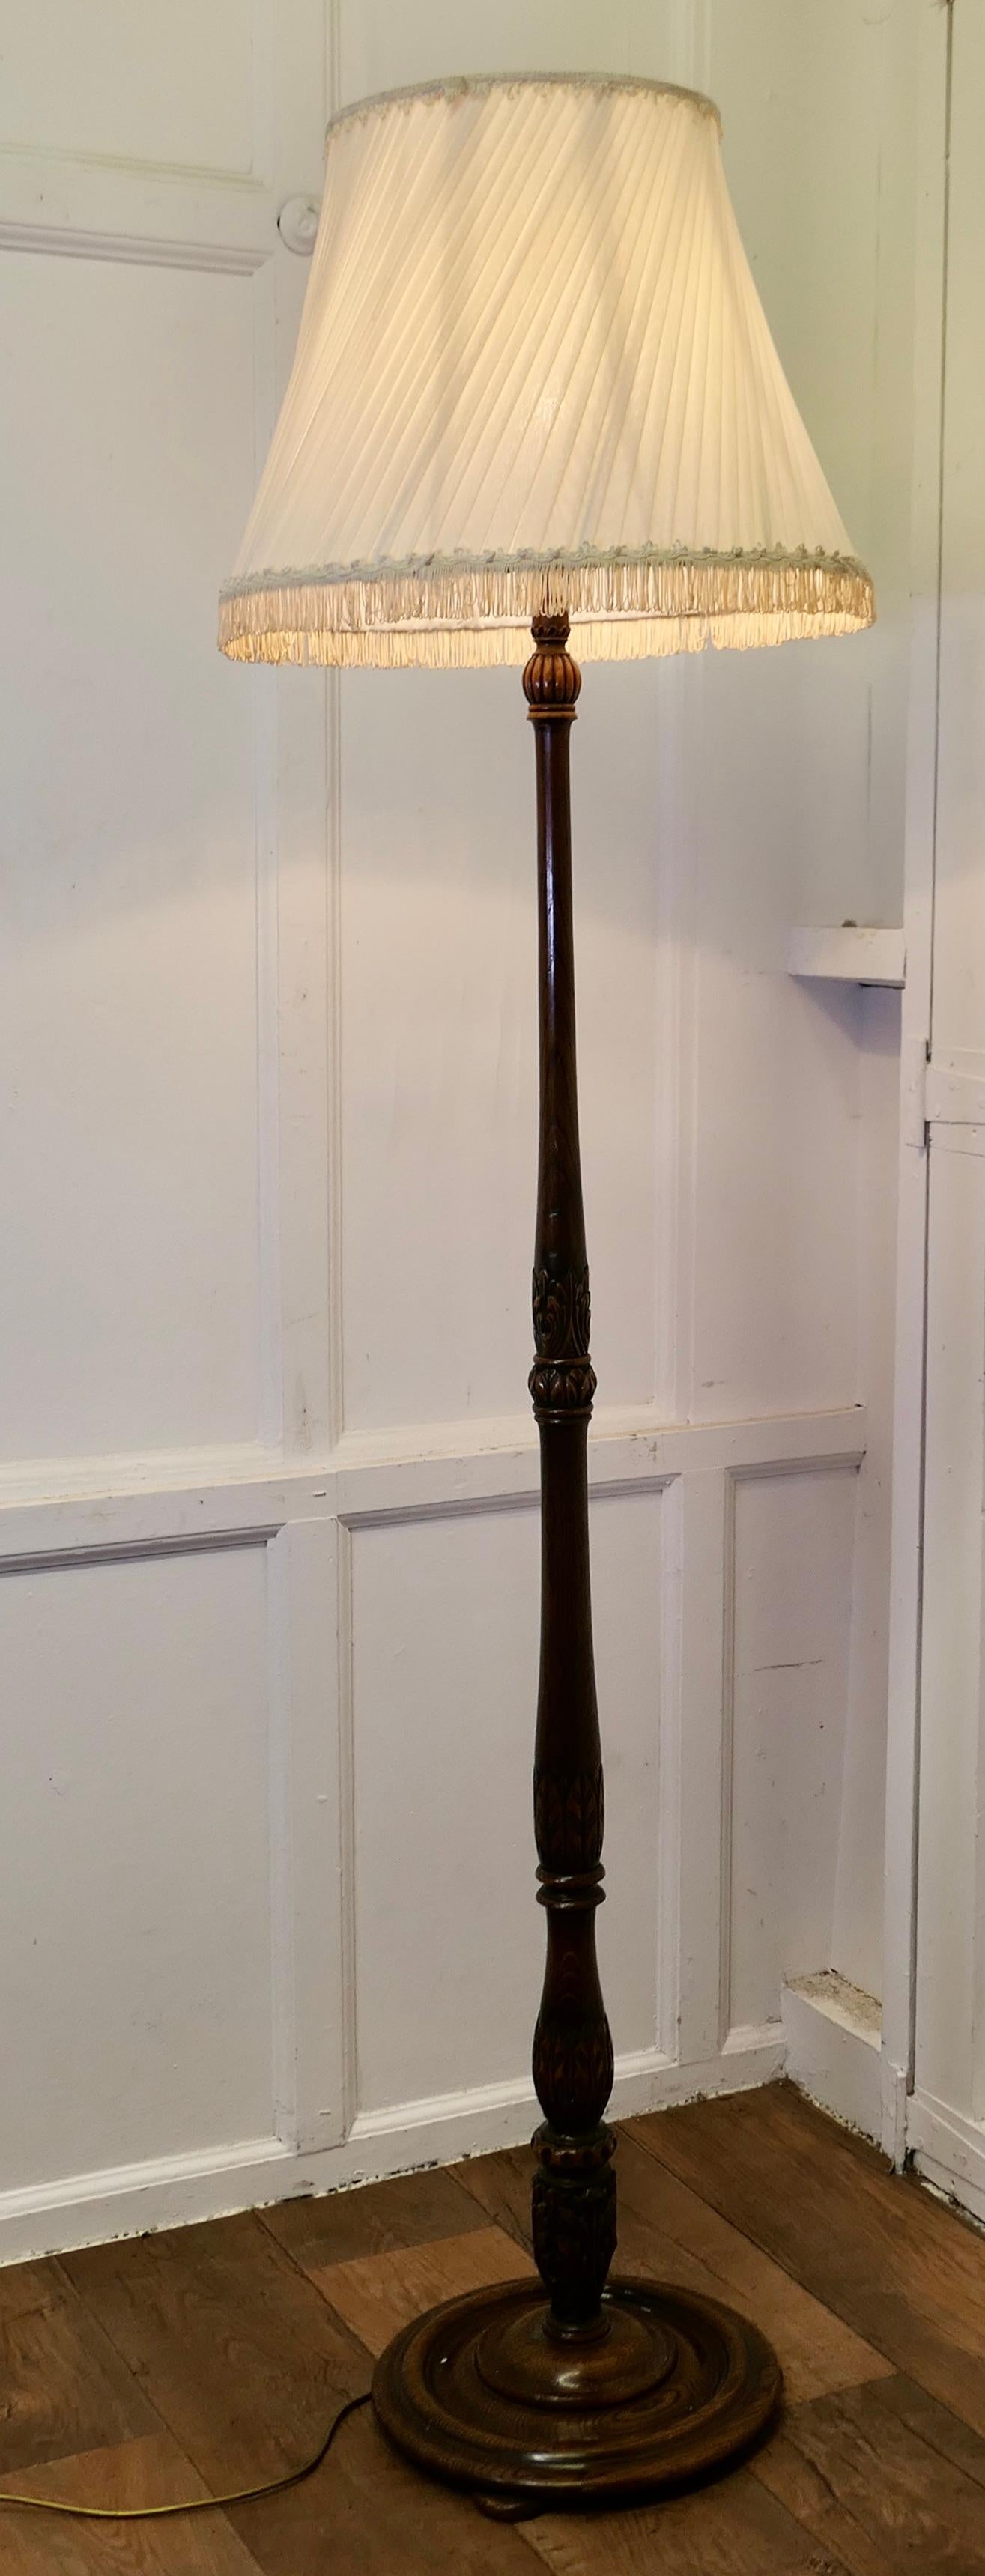 Carved and Turned Oak Floor Lamp, Standard Lamp

 A skilfully turned and carved piece of Oak furniture, this lamp stands on a turned wooden base, it is in good condition, the wiring is new, this is a very fine quality lamp
The lamp is 74” high and